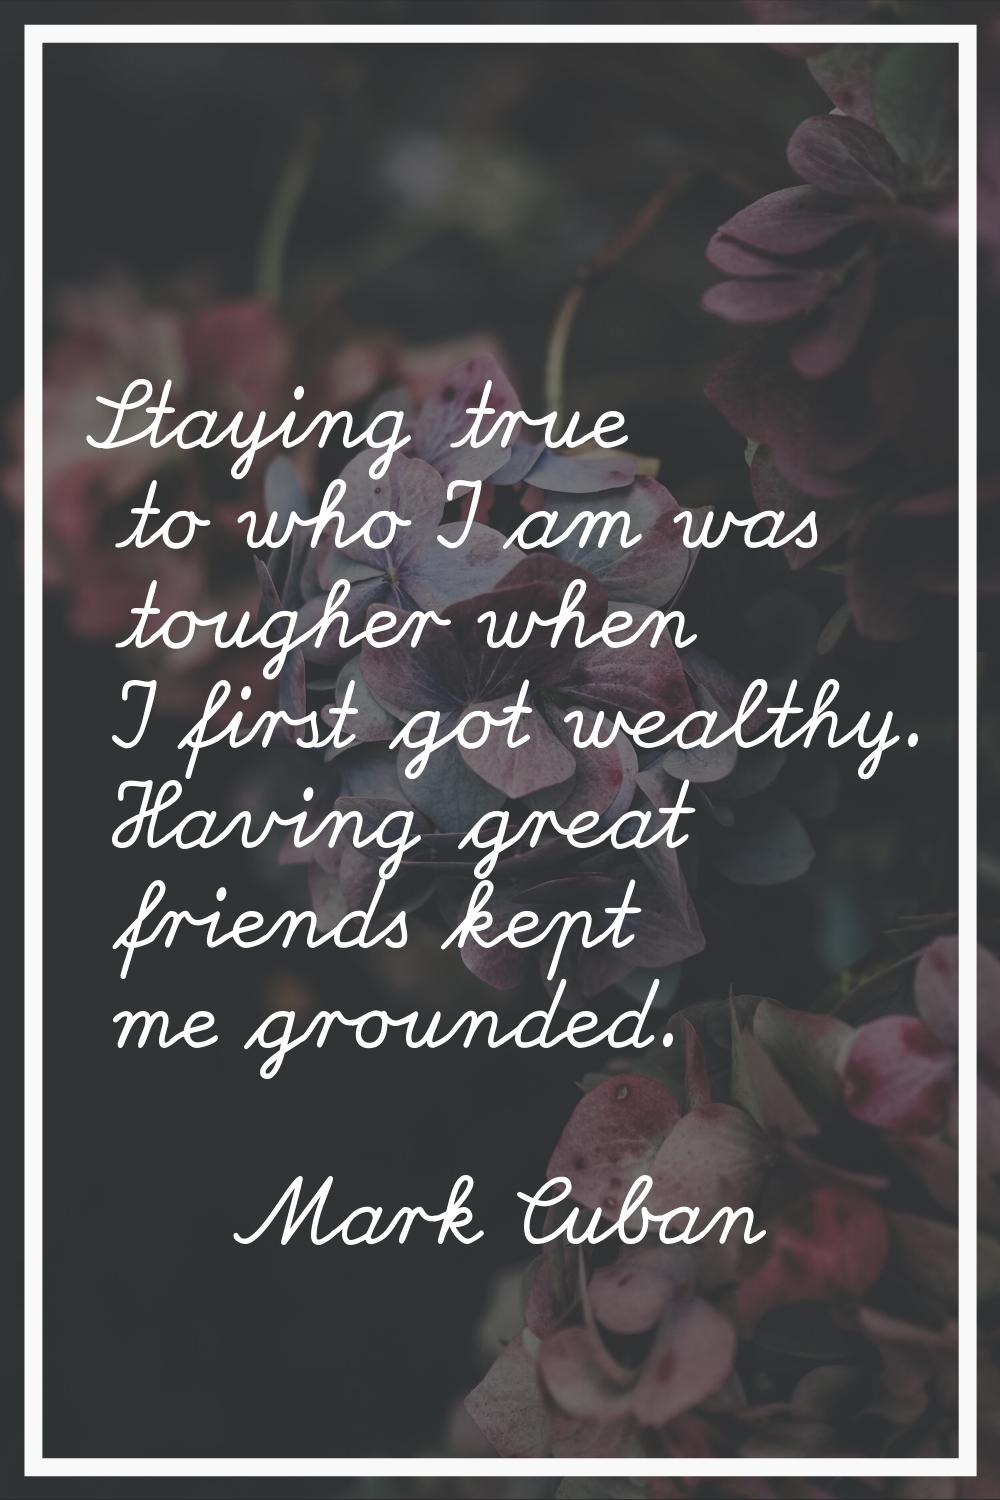 Staying true to who I am was tougher when I first got wealthy. Having great friends kept me grounde